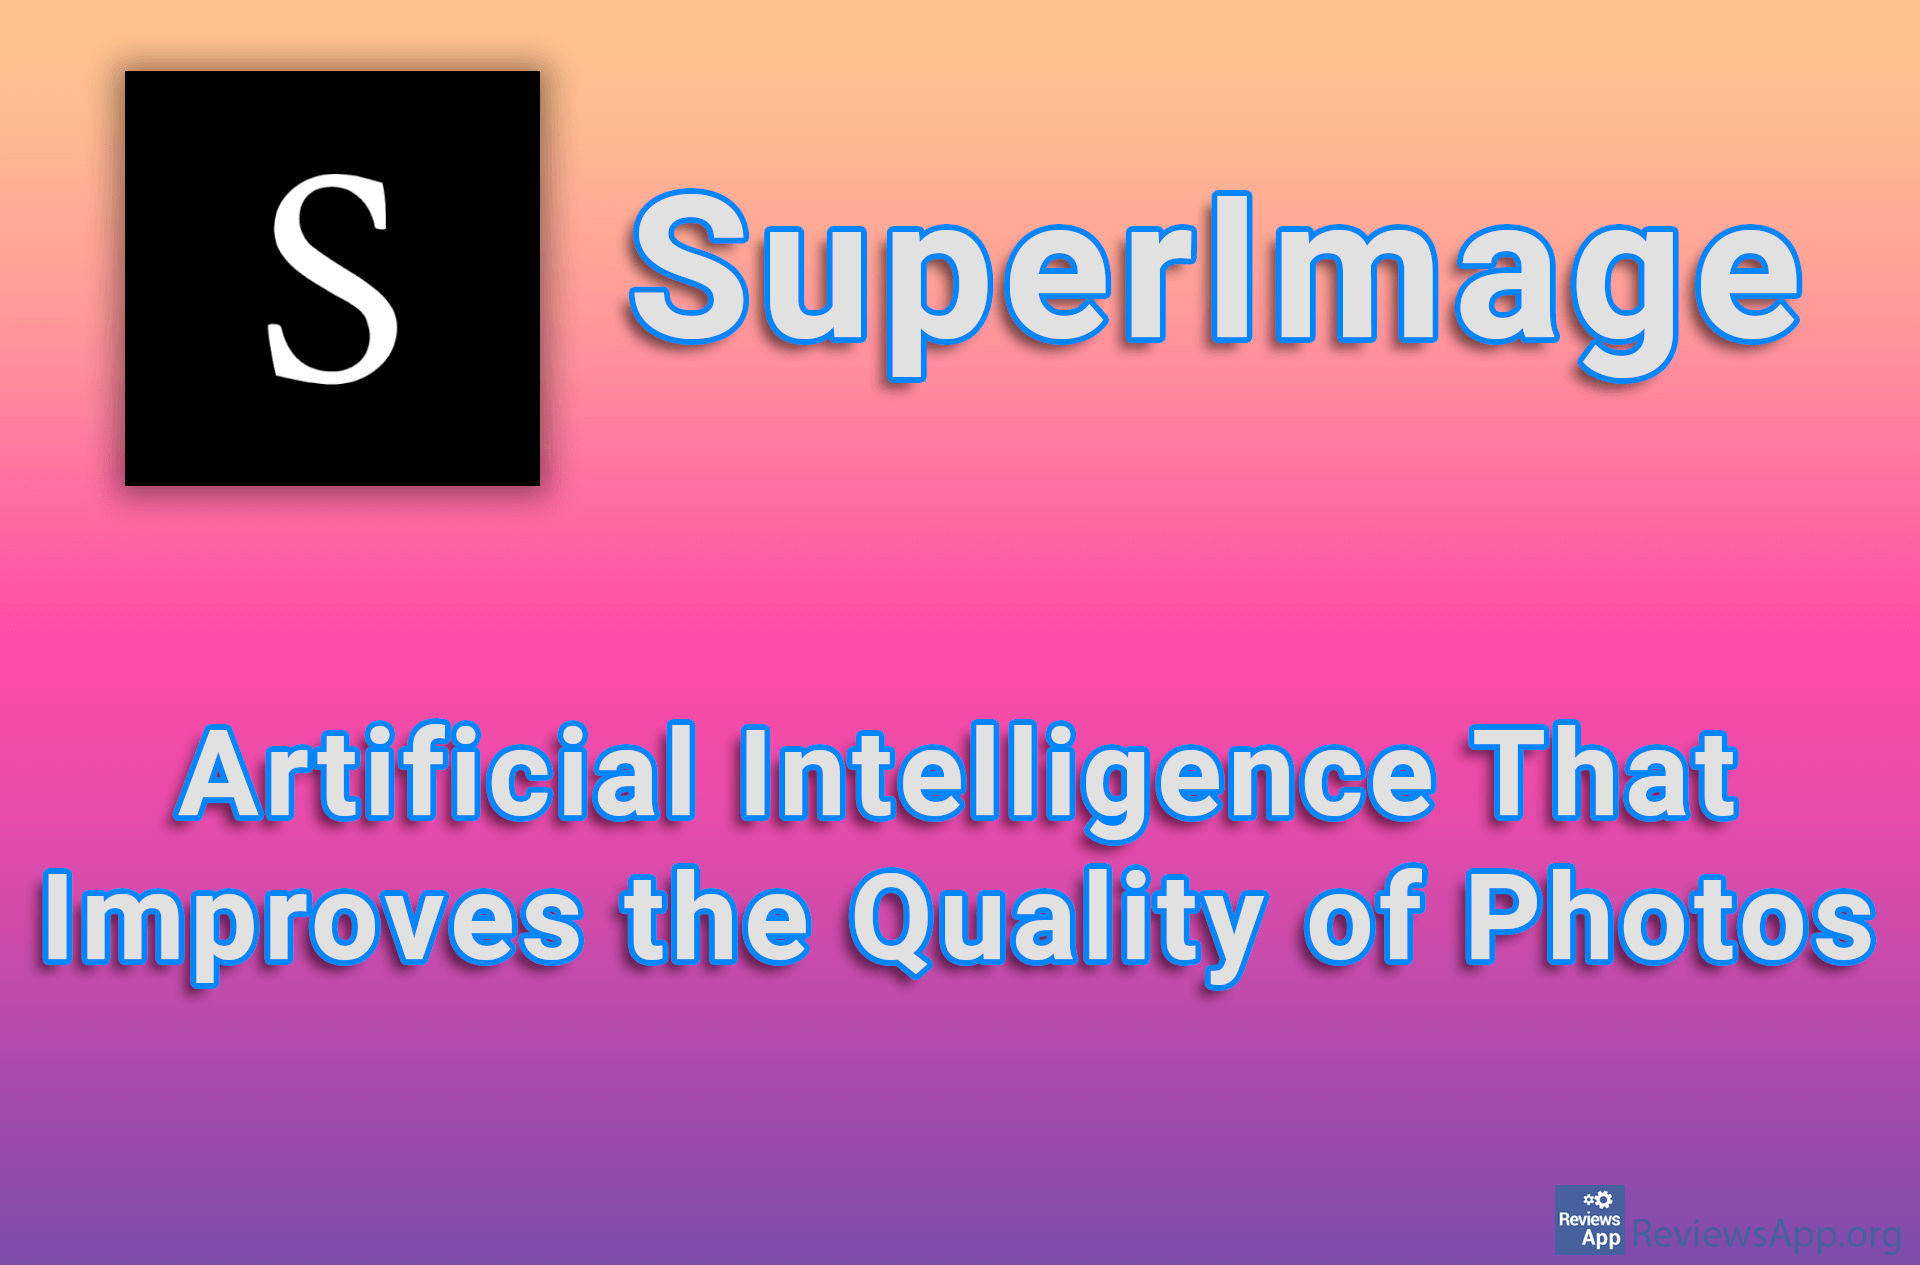 SuperImage – Artificial Intelligence That Improves the Quality of Photos